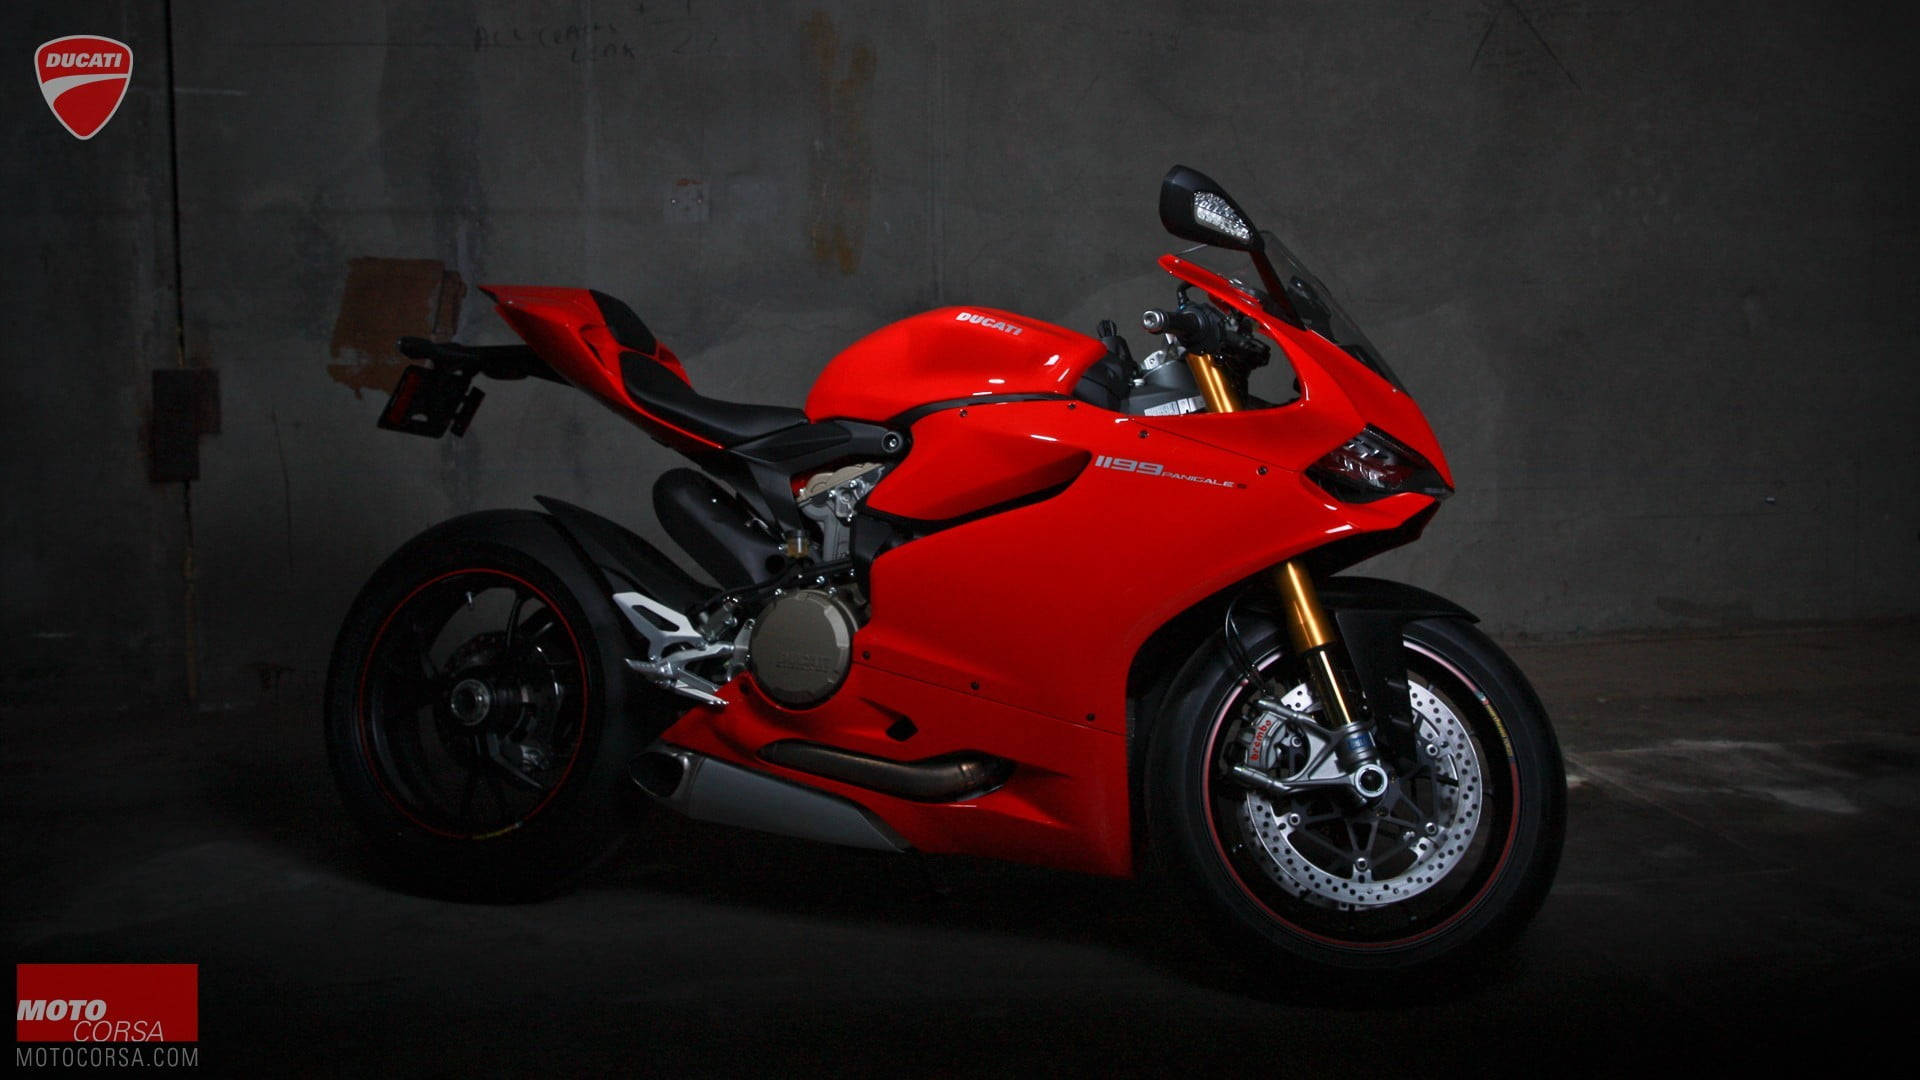 Enjoy the speed of the Ducati 1199 Panigale Wallpaper